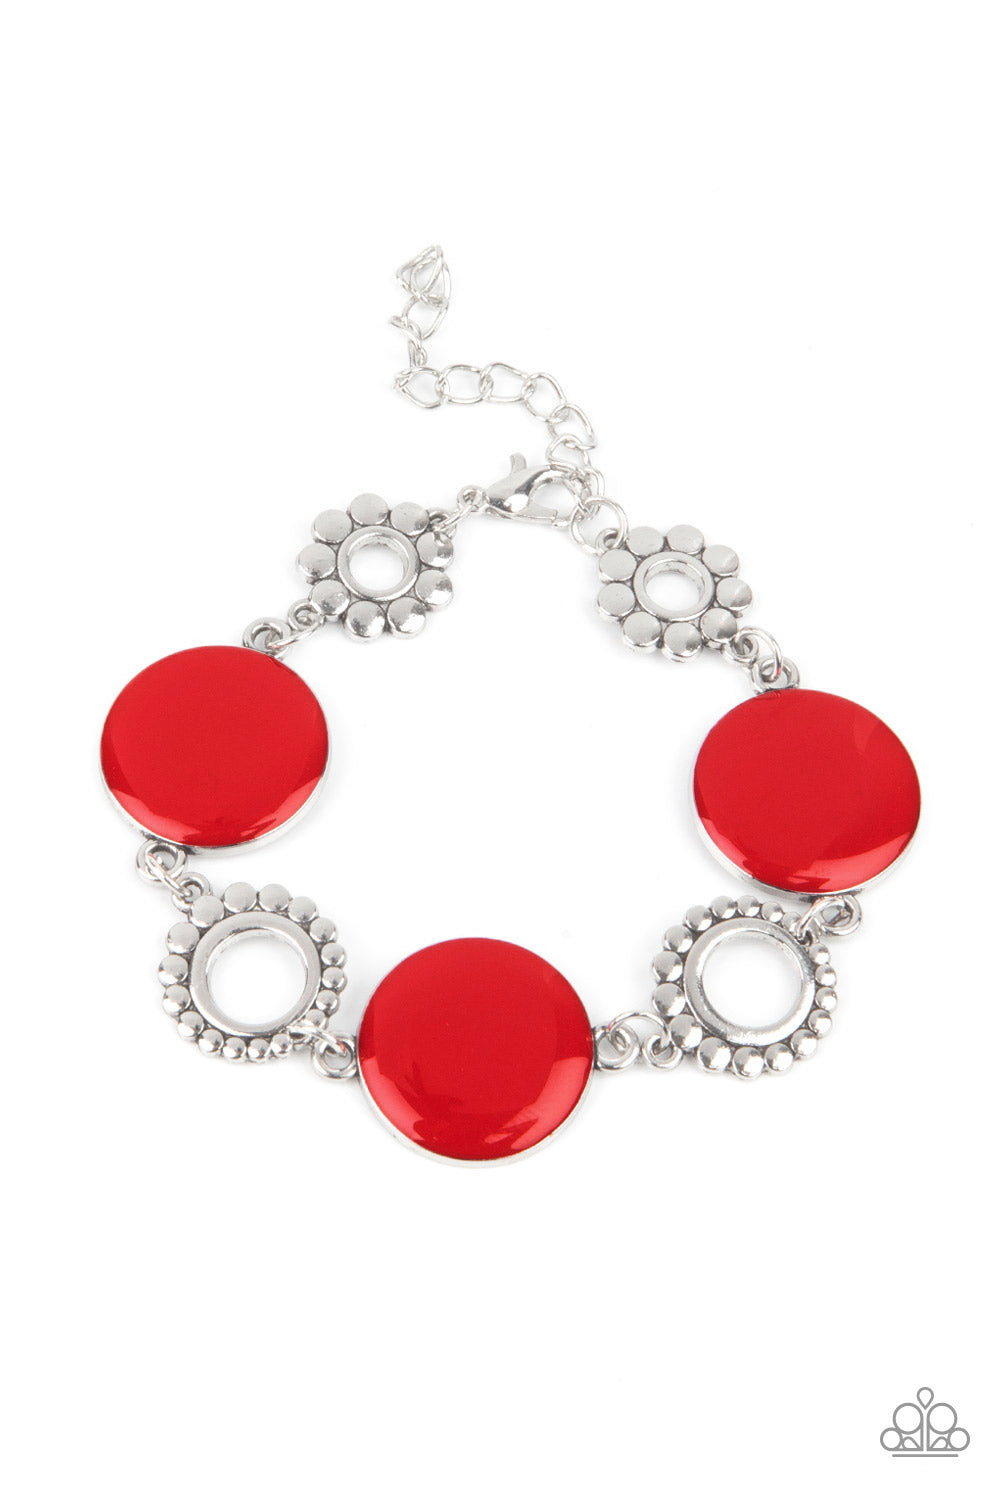 Featuring shiny red accents, studded silver circles and shimmery silver floral accents